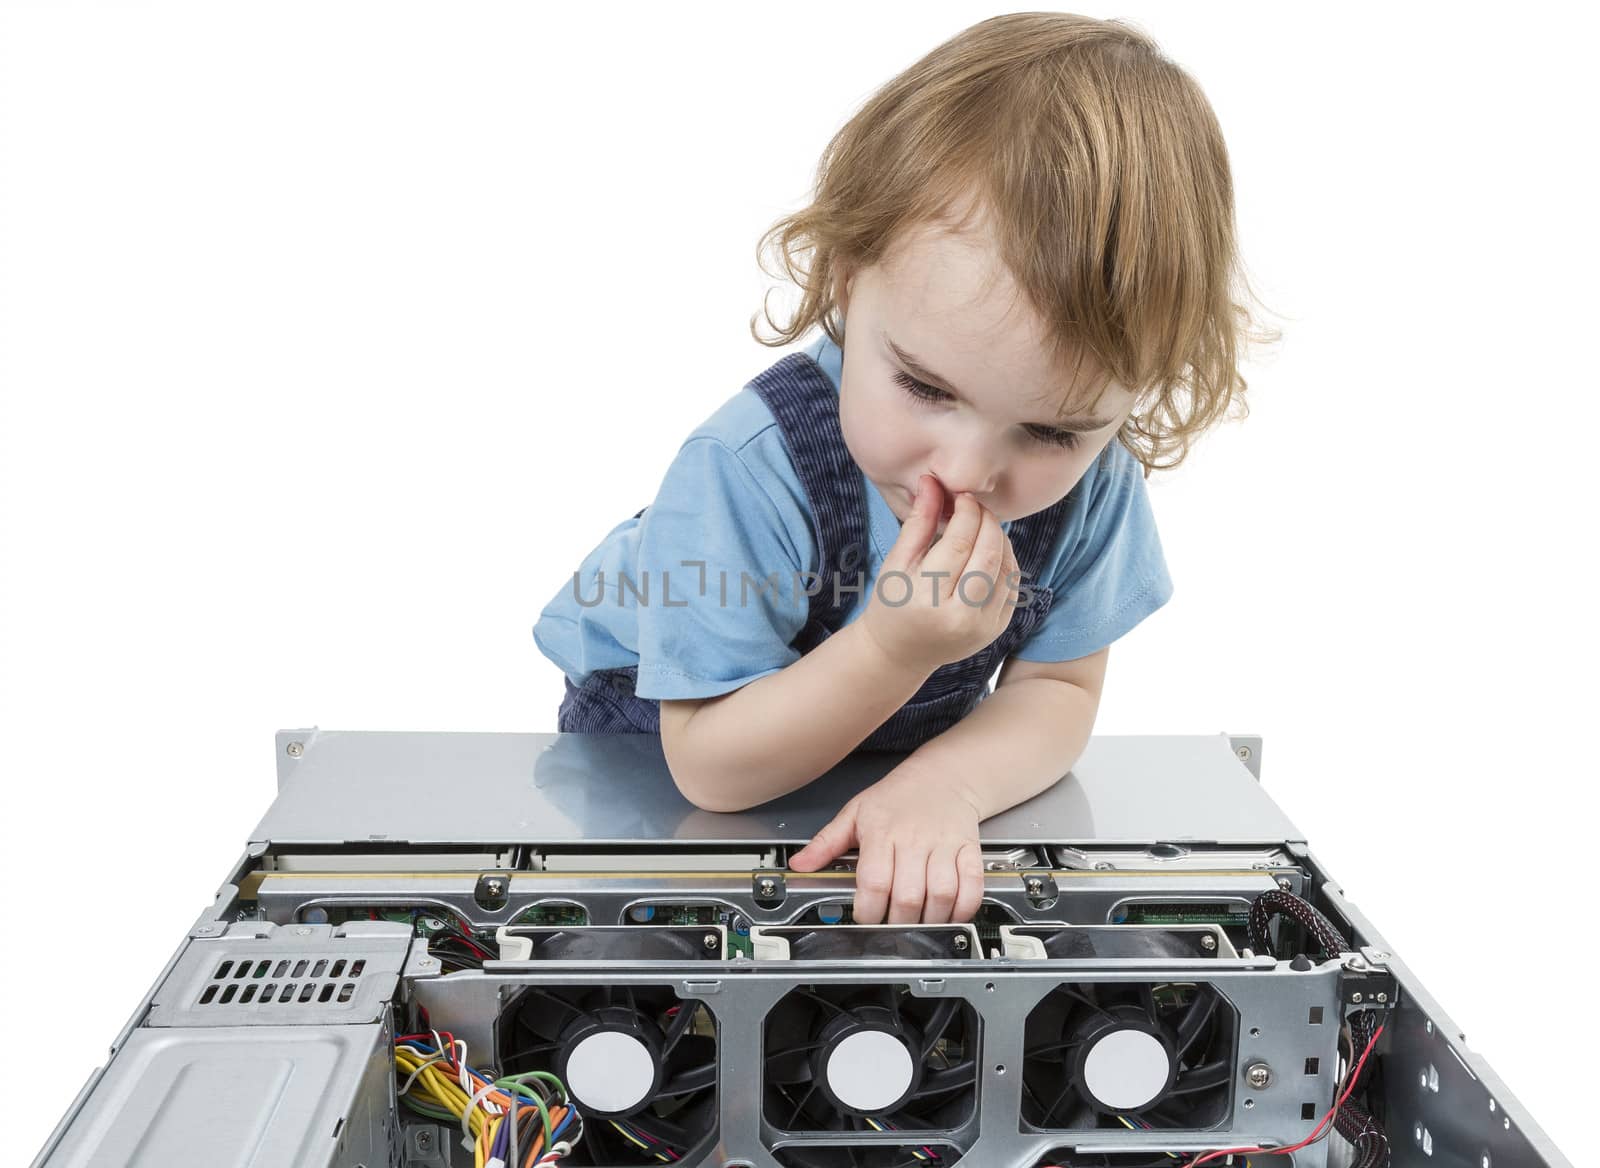 child with network computer by gewoldi